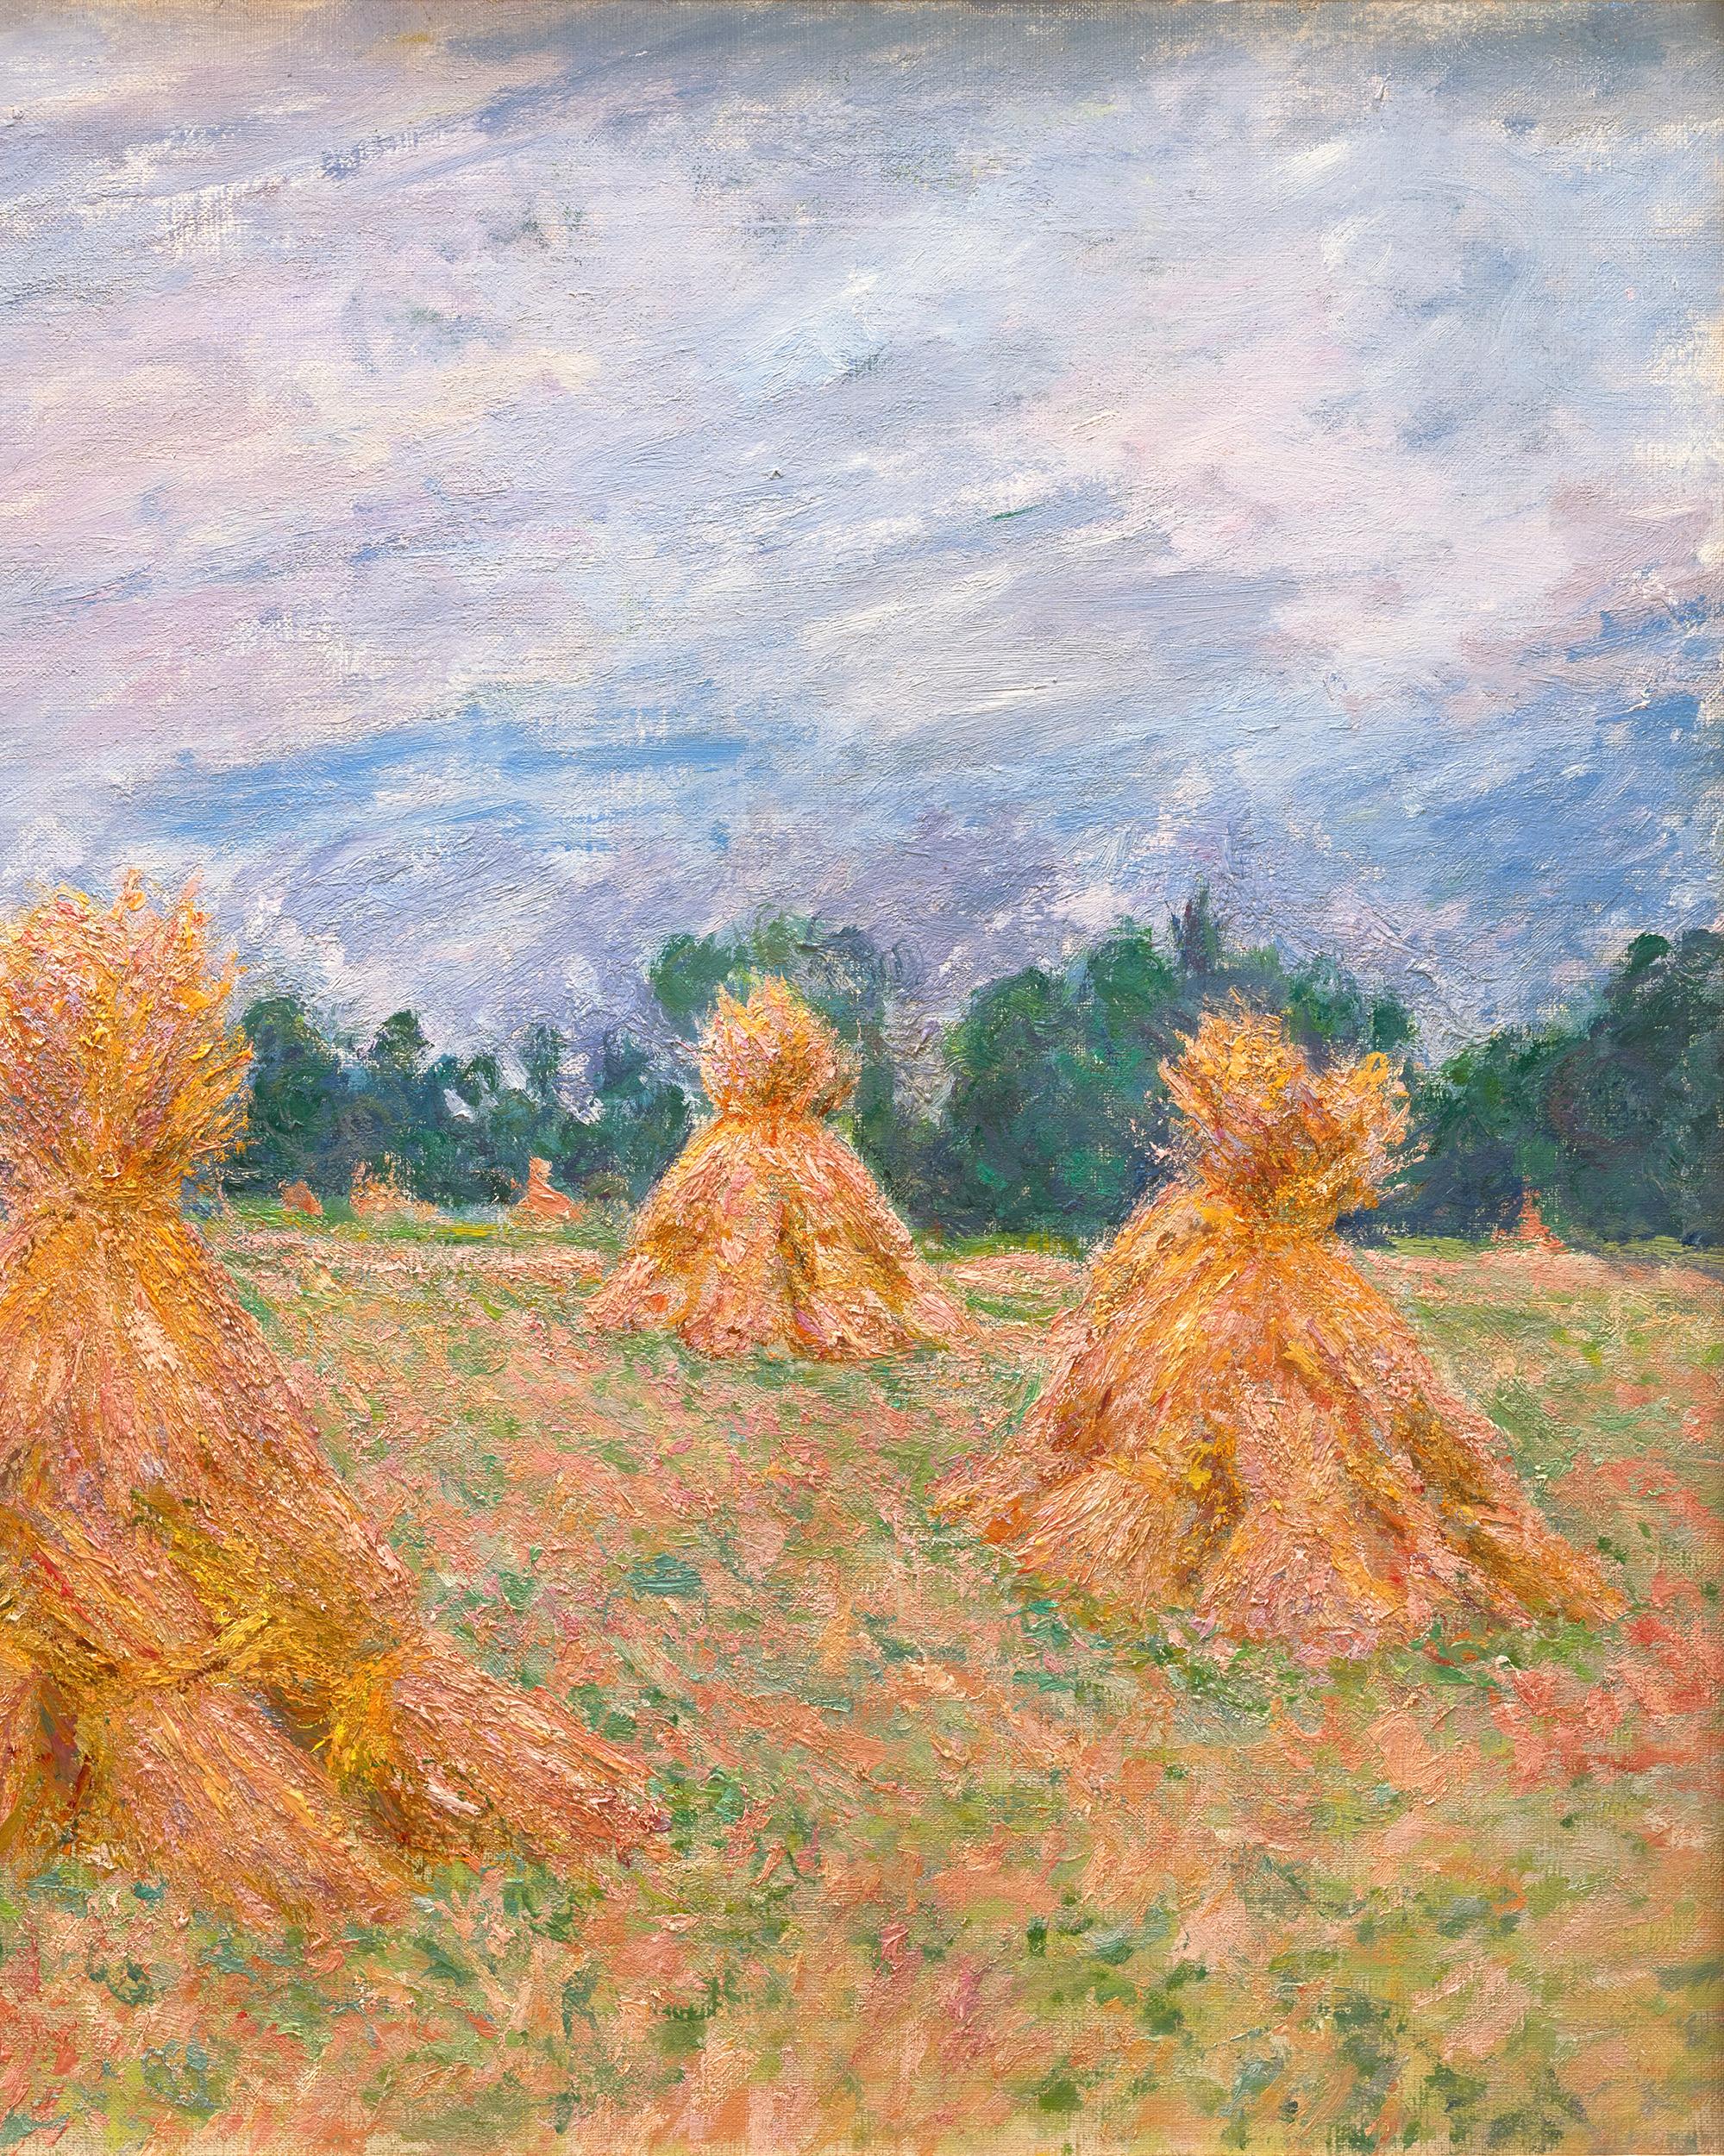 Blanche Hoschedé-Monet
1865-1947  French

La Moisson
(The Harvest)

Oil on canvas

In this exceptional oil on canvas entitled La Moisson from French artist Blanche Hoschedé-Monet, eight bales of hay dot a scenic landscape. Executed circa 1885, a